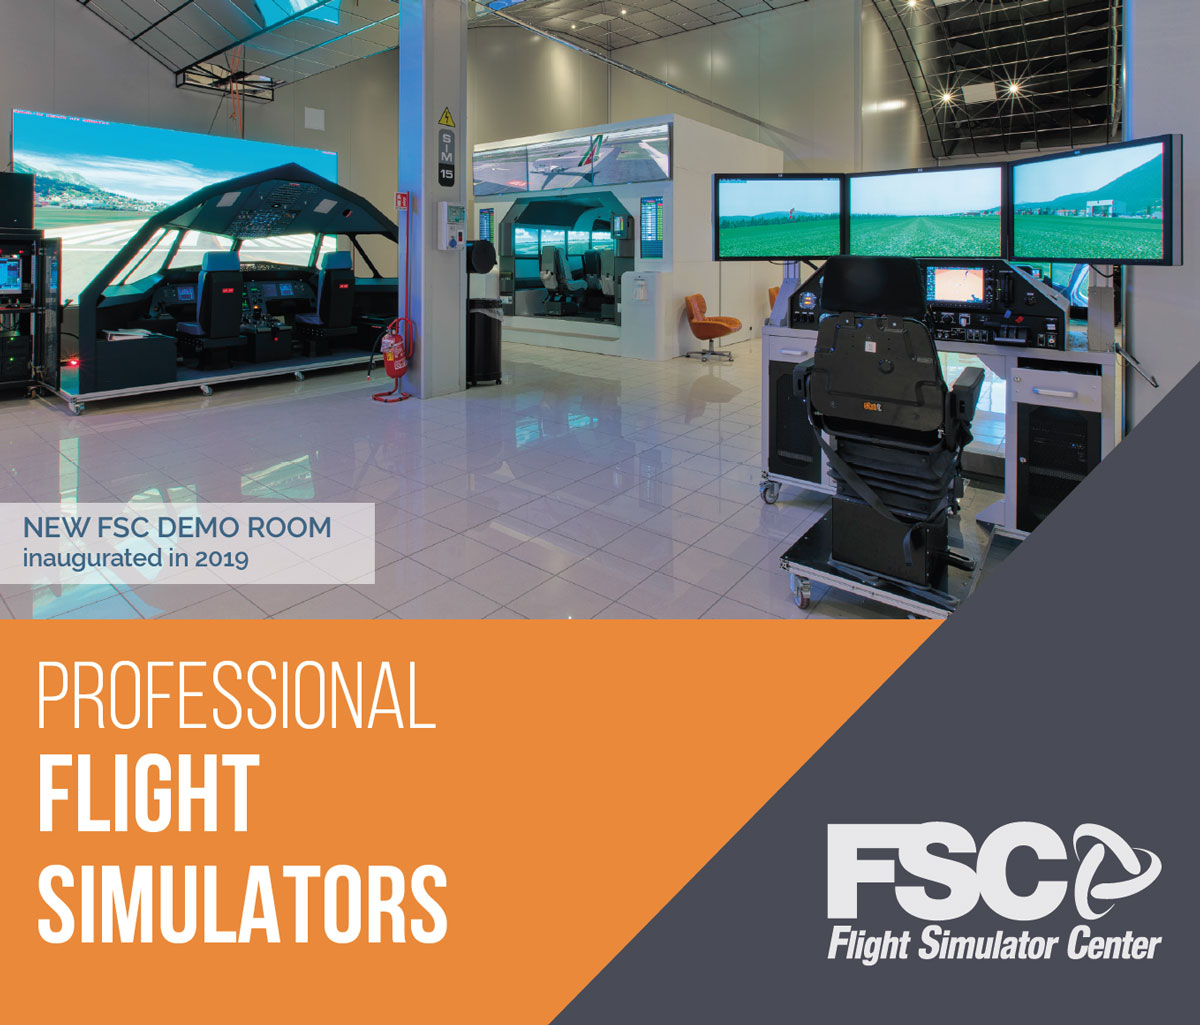 Professional Helicopter Simulator - FLYIT Simulators, The New